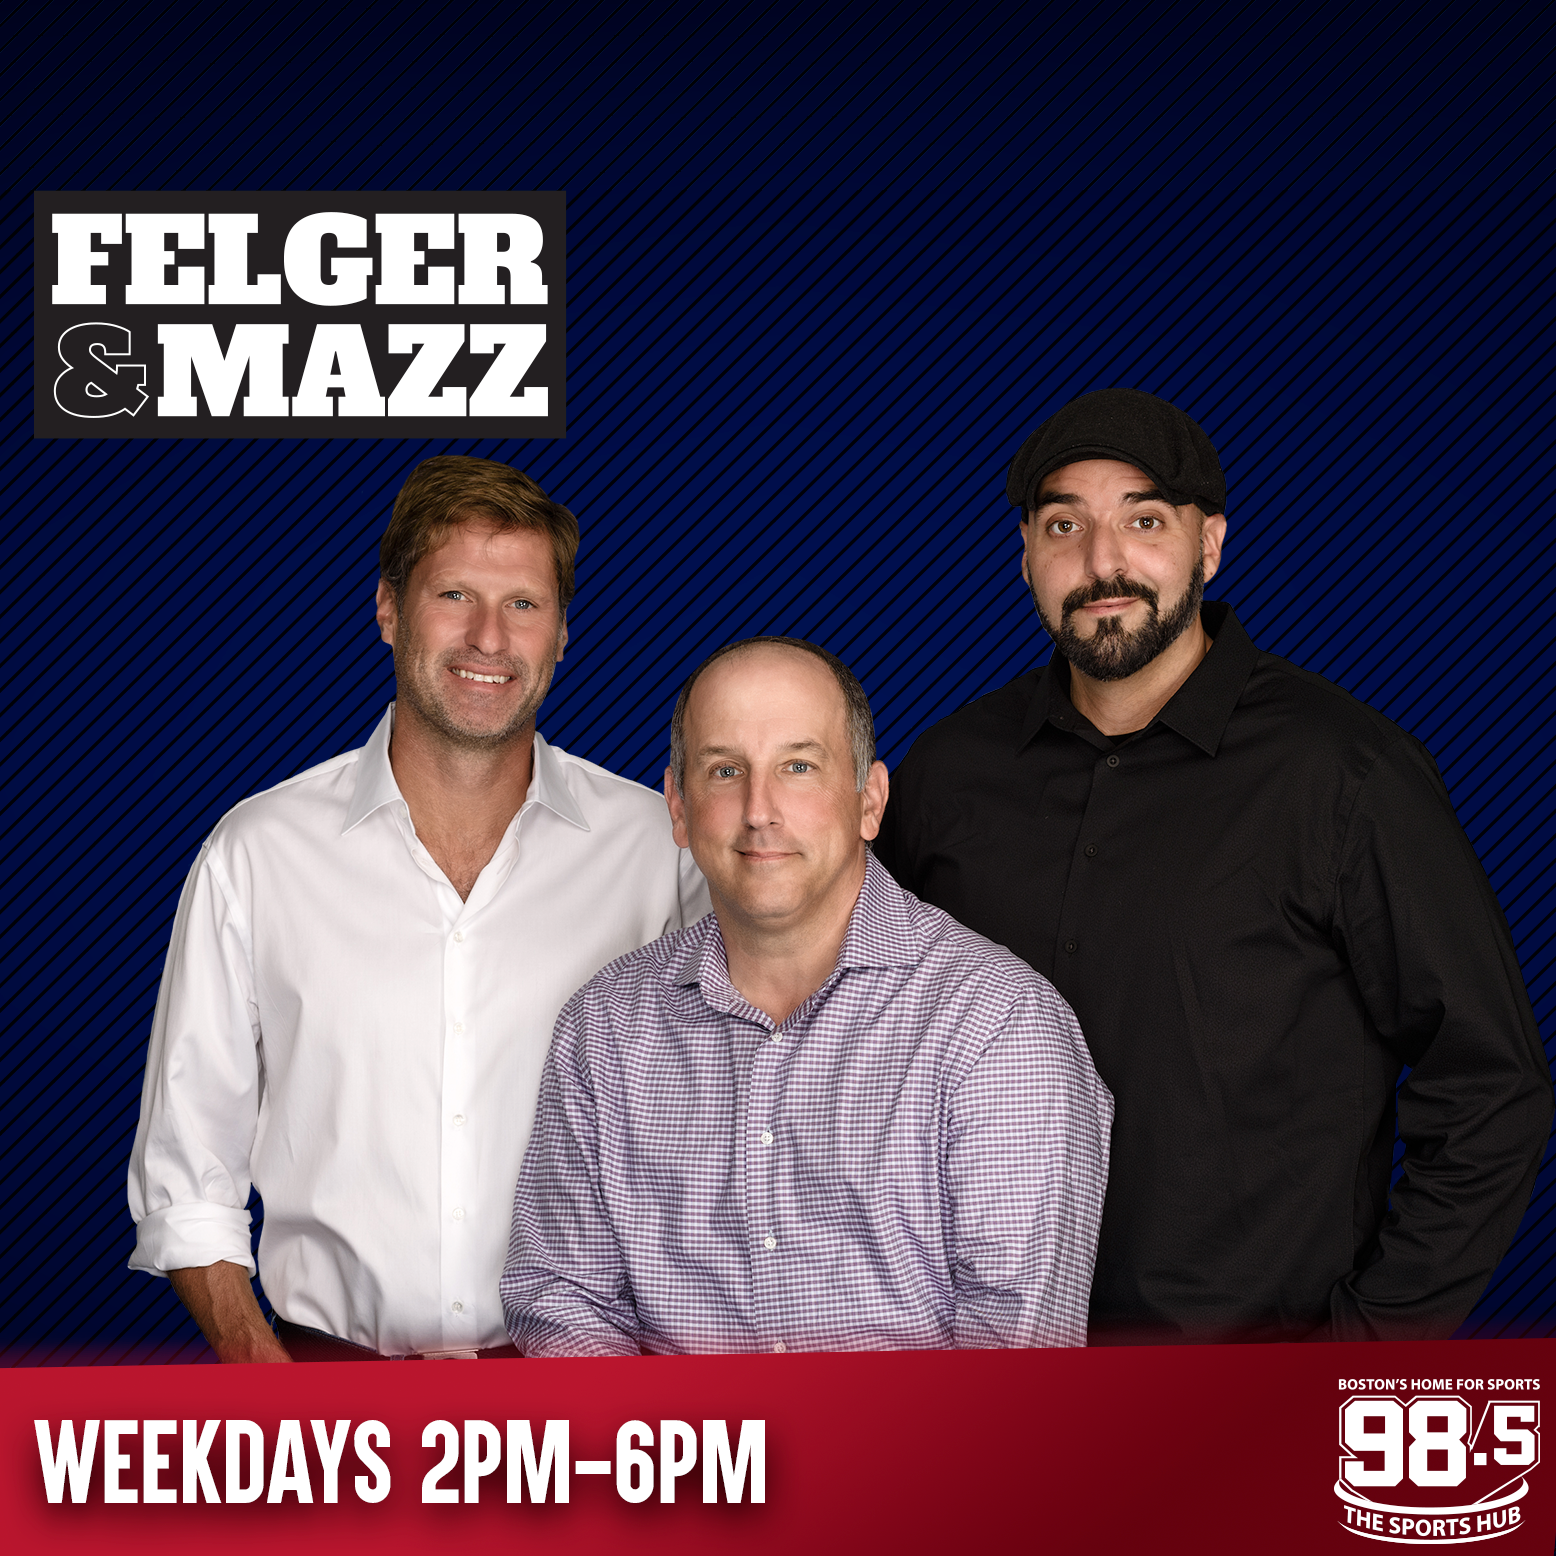 Felger & Mazz: Chris Sale to Undergo Tommy John Surgery, Tom Brady & the Buccaneers, and the Final Word (Hour 4)